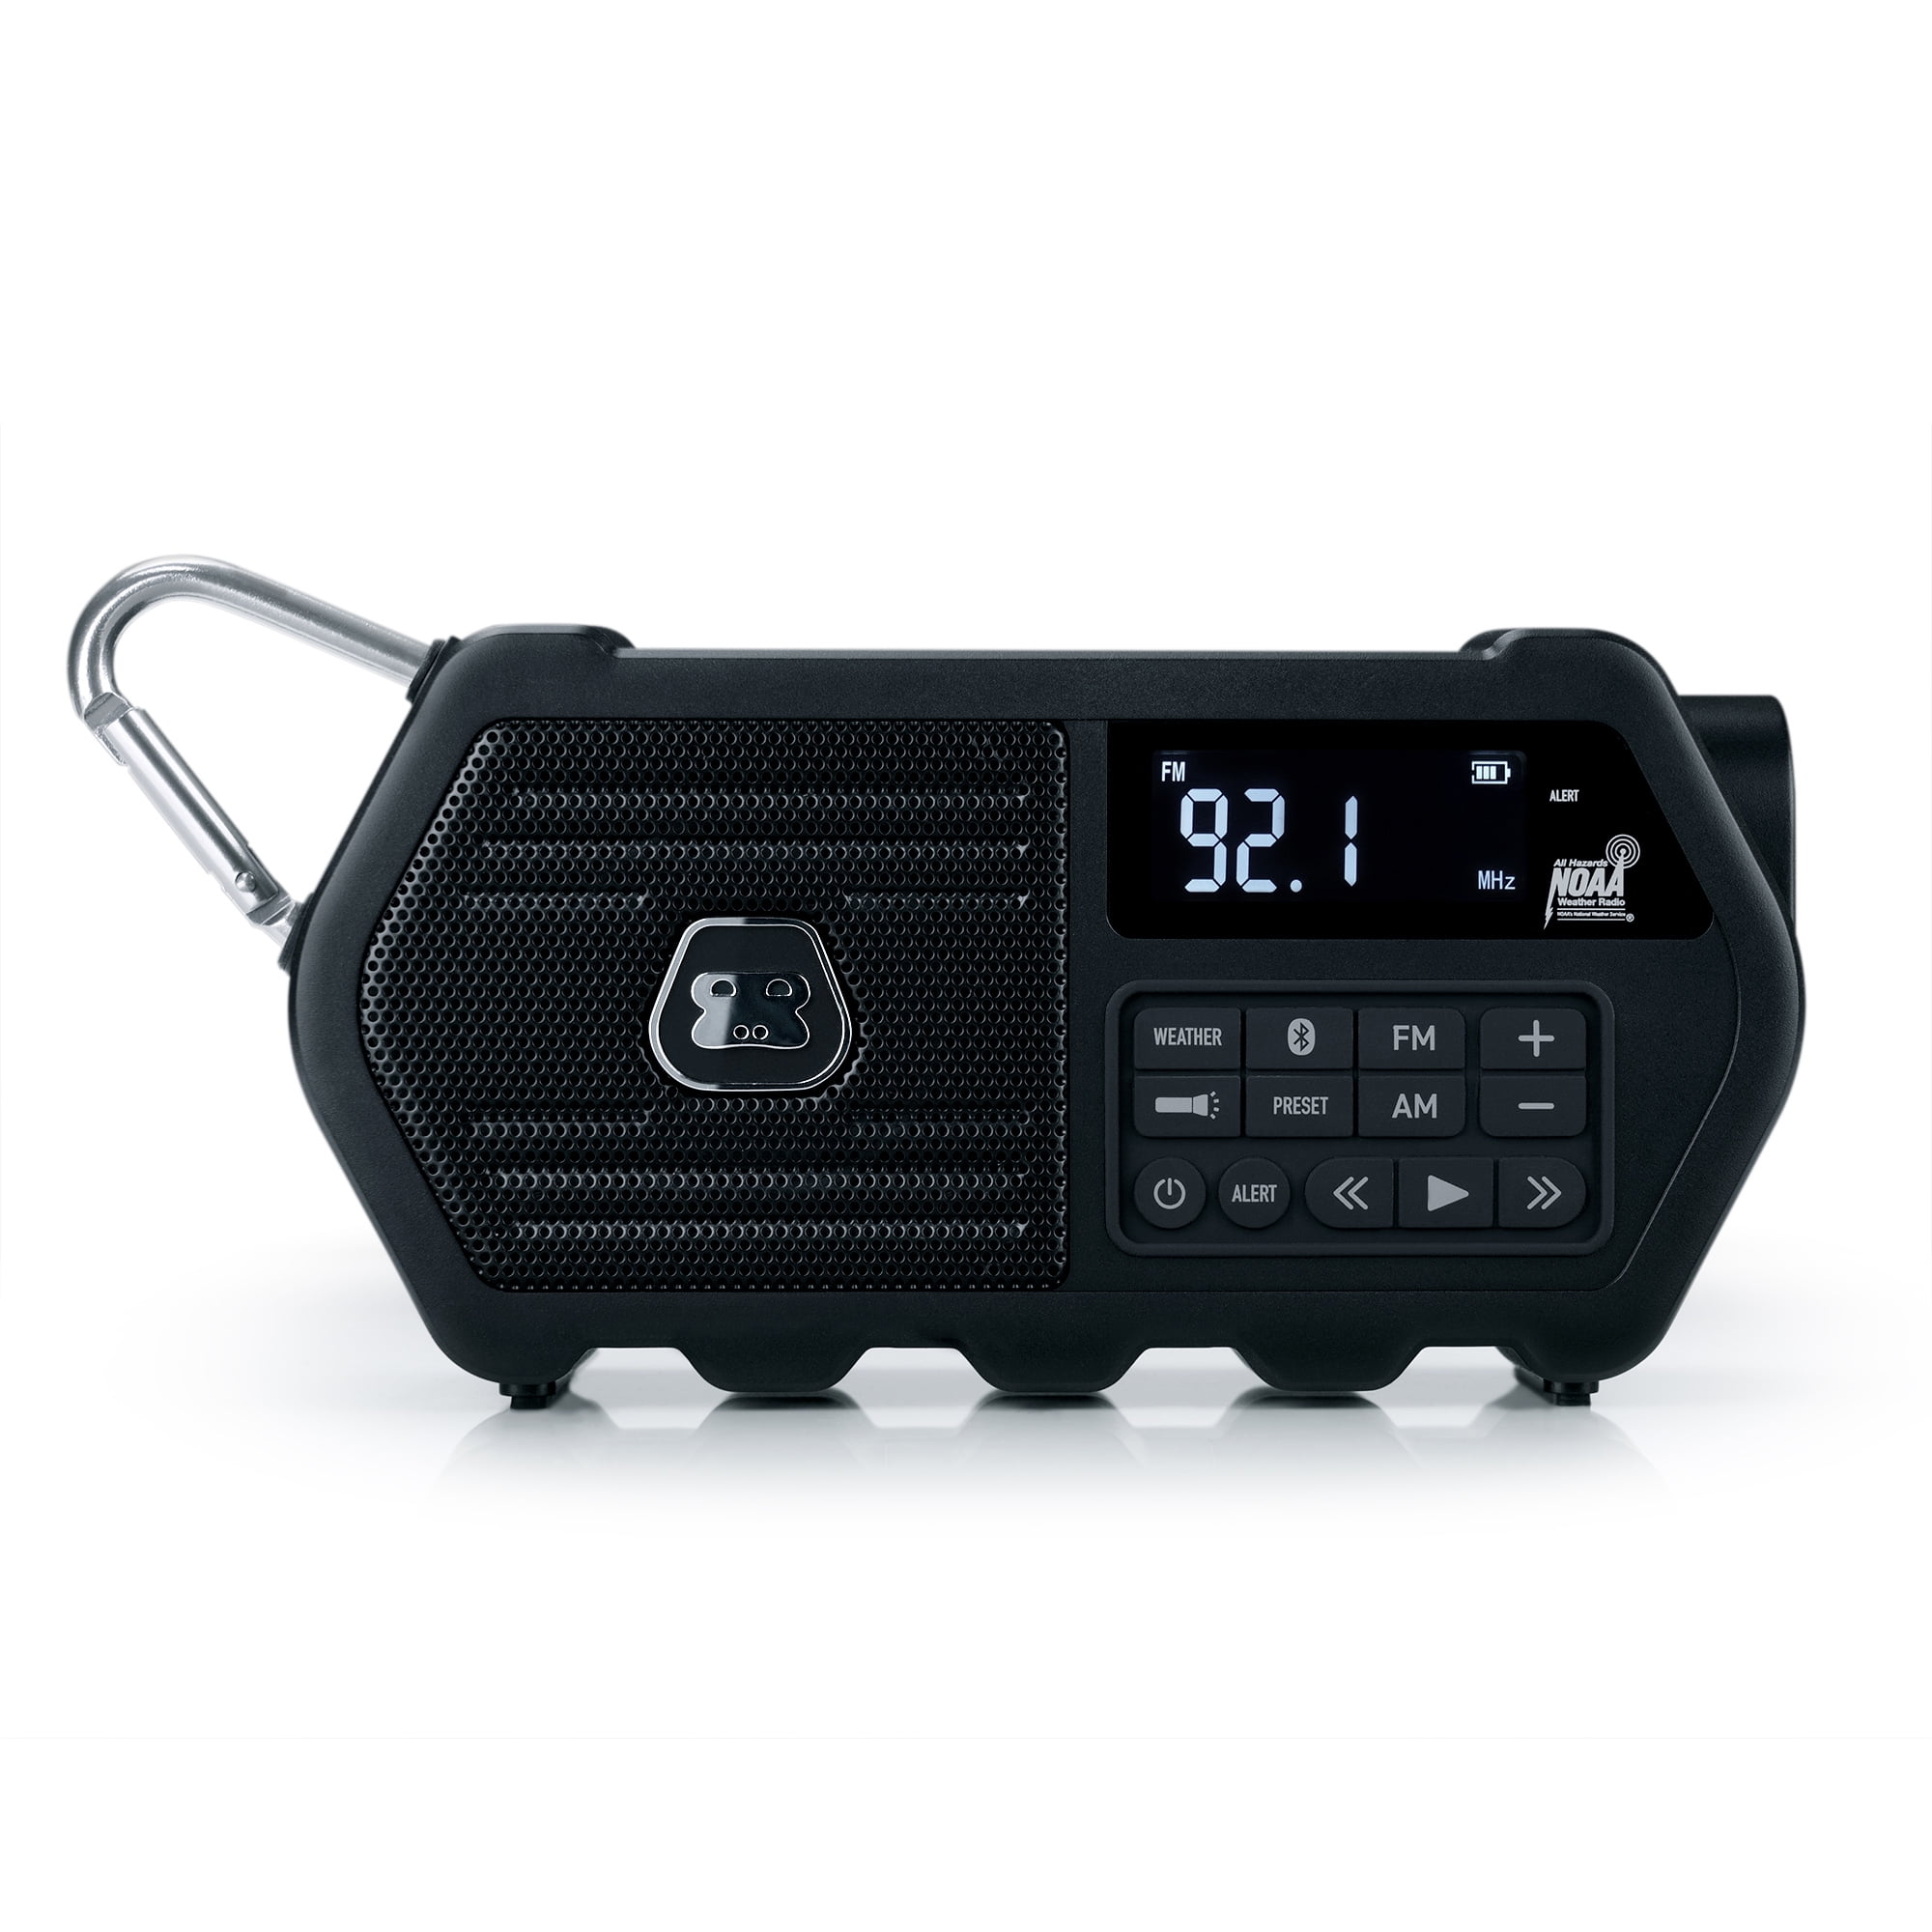 G-Project G-Storm Bluetooth Speaker, with AM/FM Weather Radio and NOAA Alerts